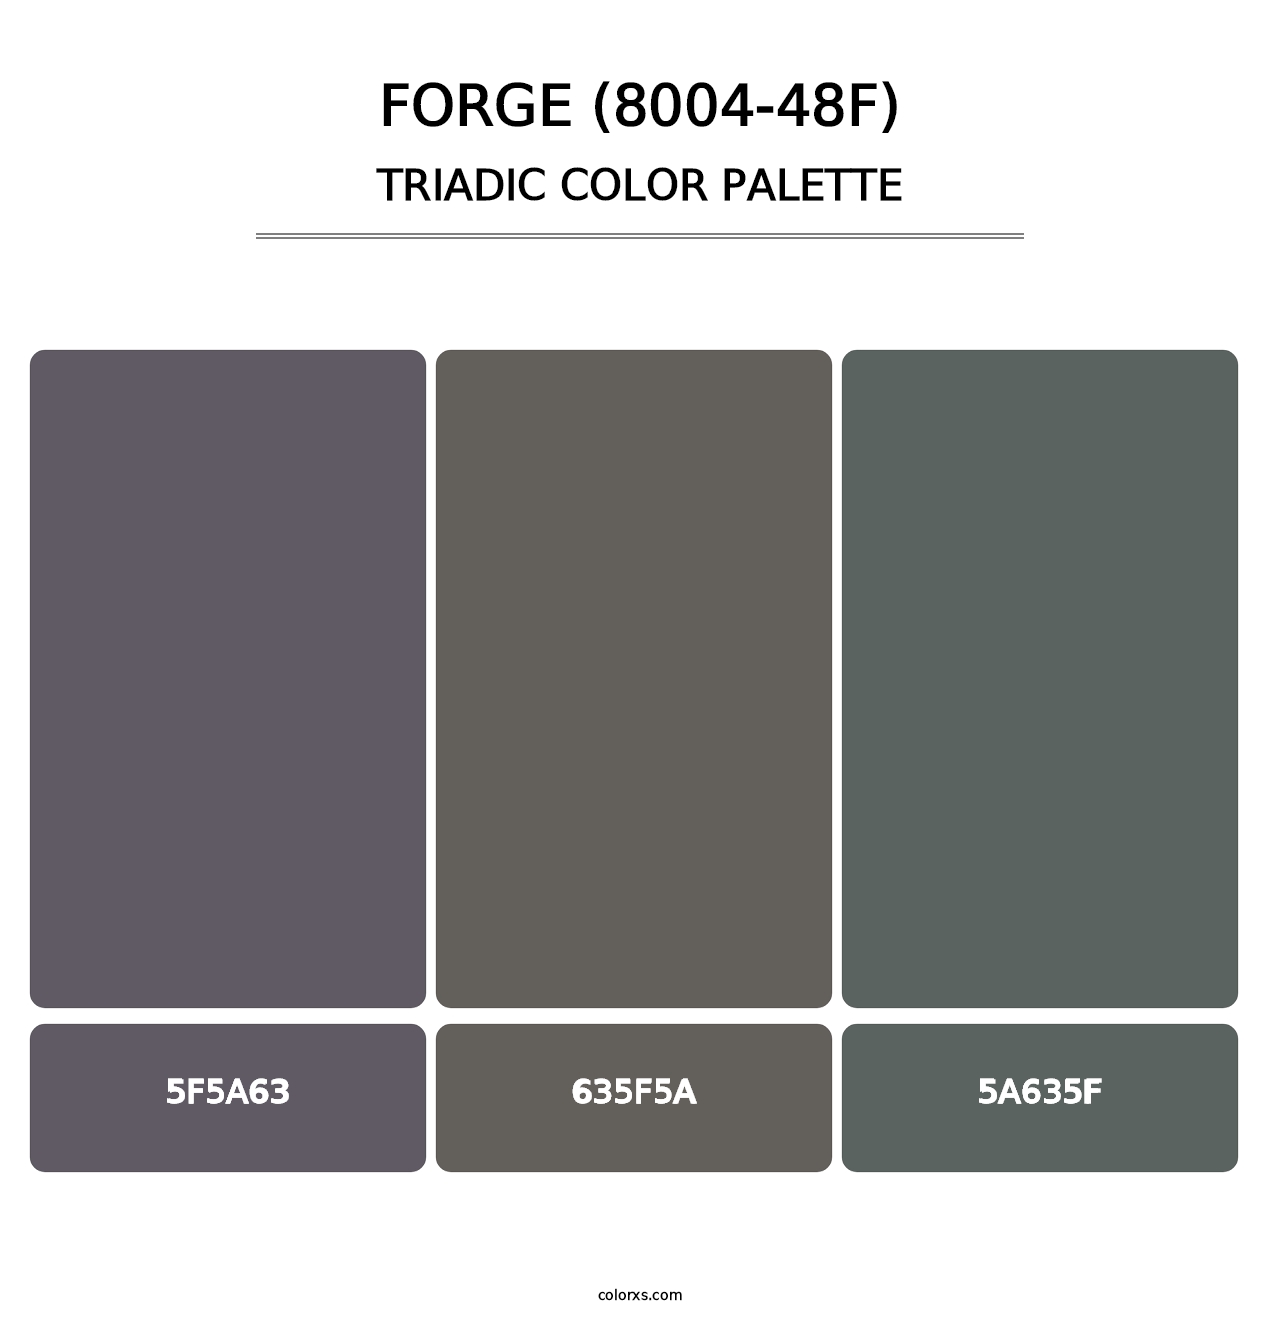 Forge (8004-48F) - Triadic Color Palette